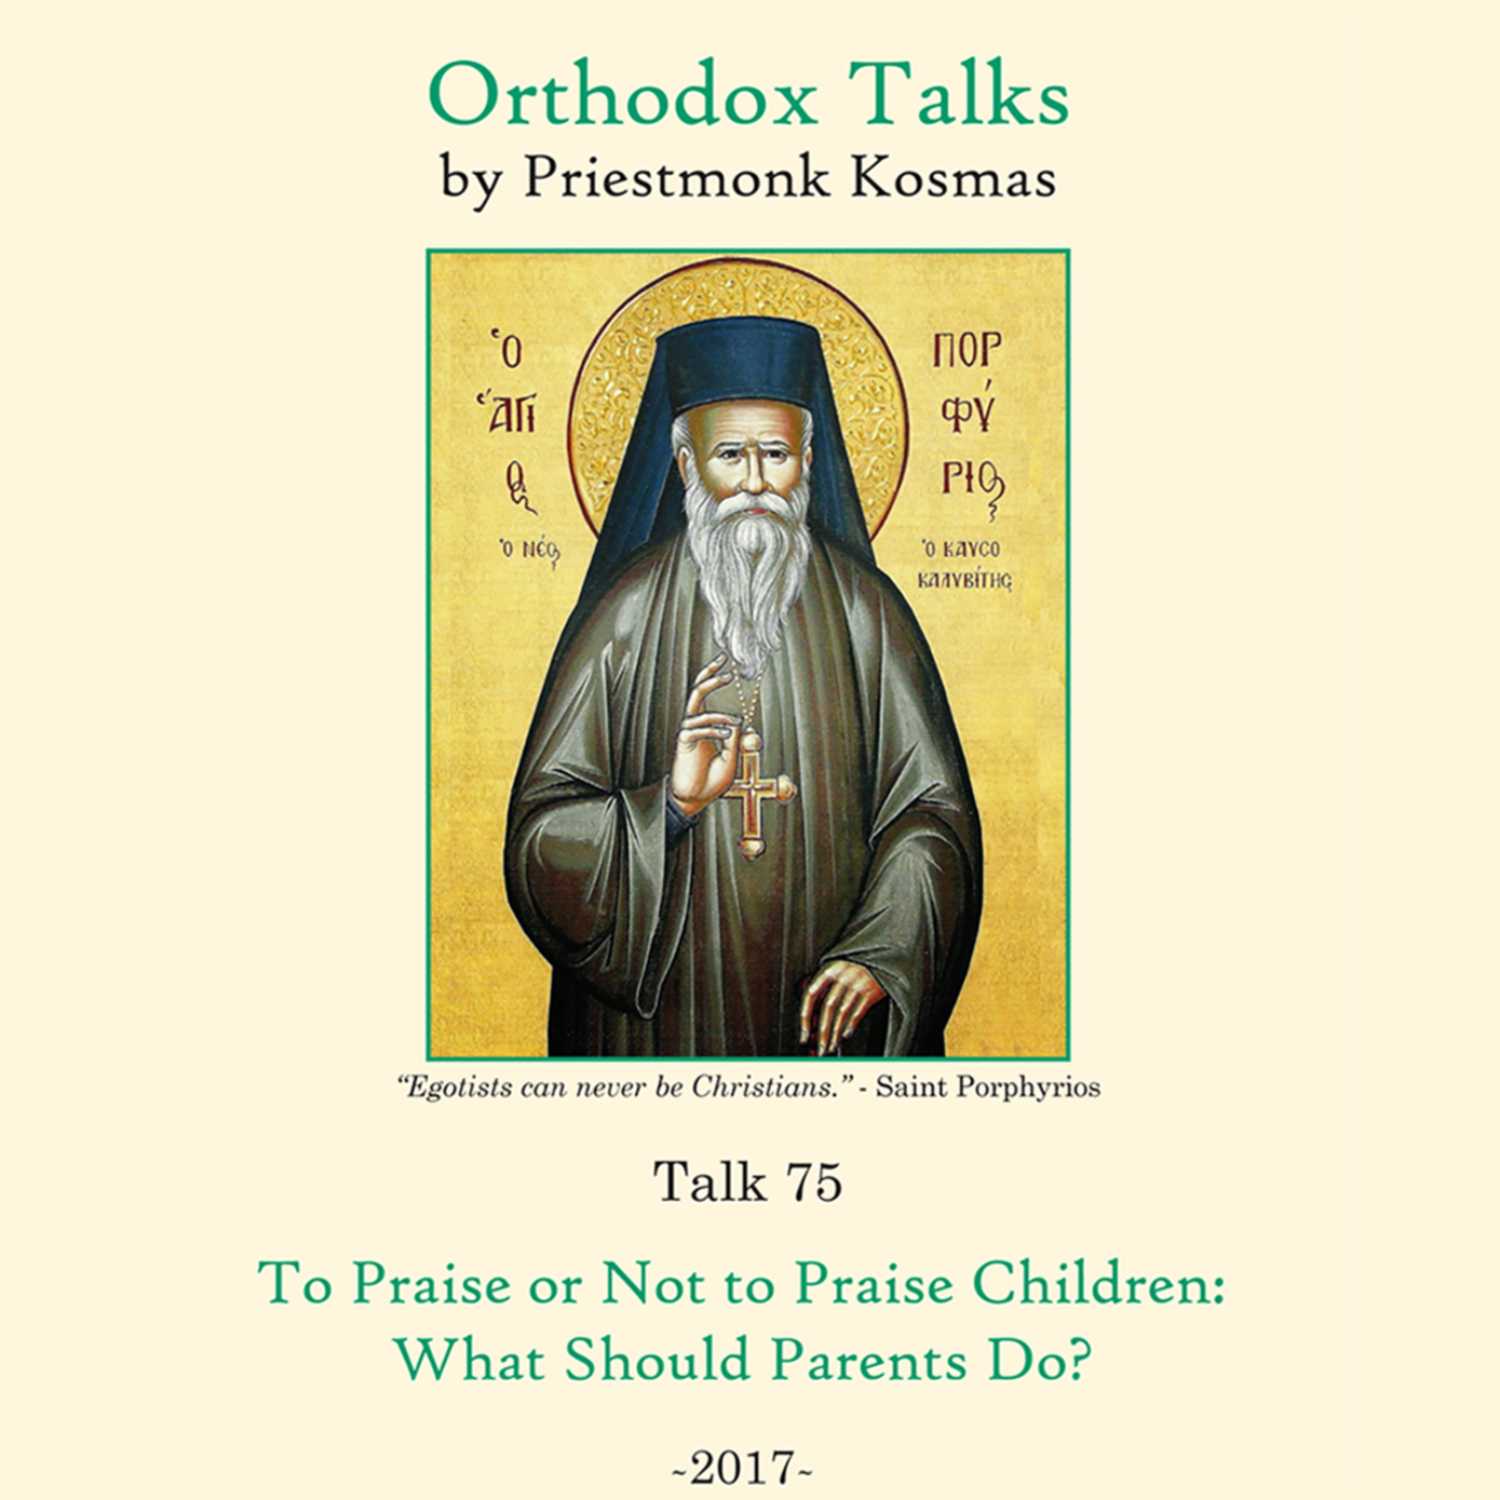 Talk 75: To Praise or Not to Praise Children: What Should Parents Do?